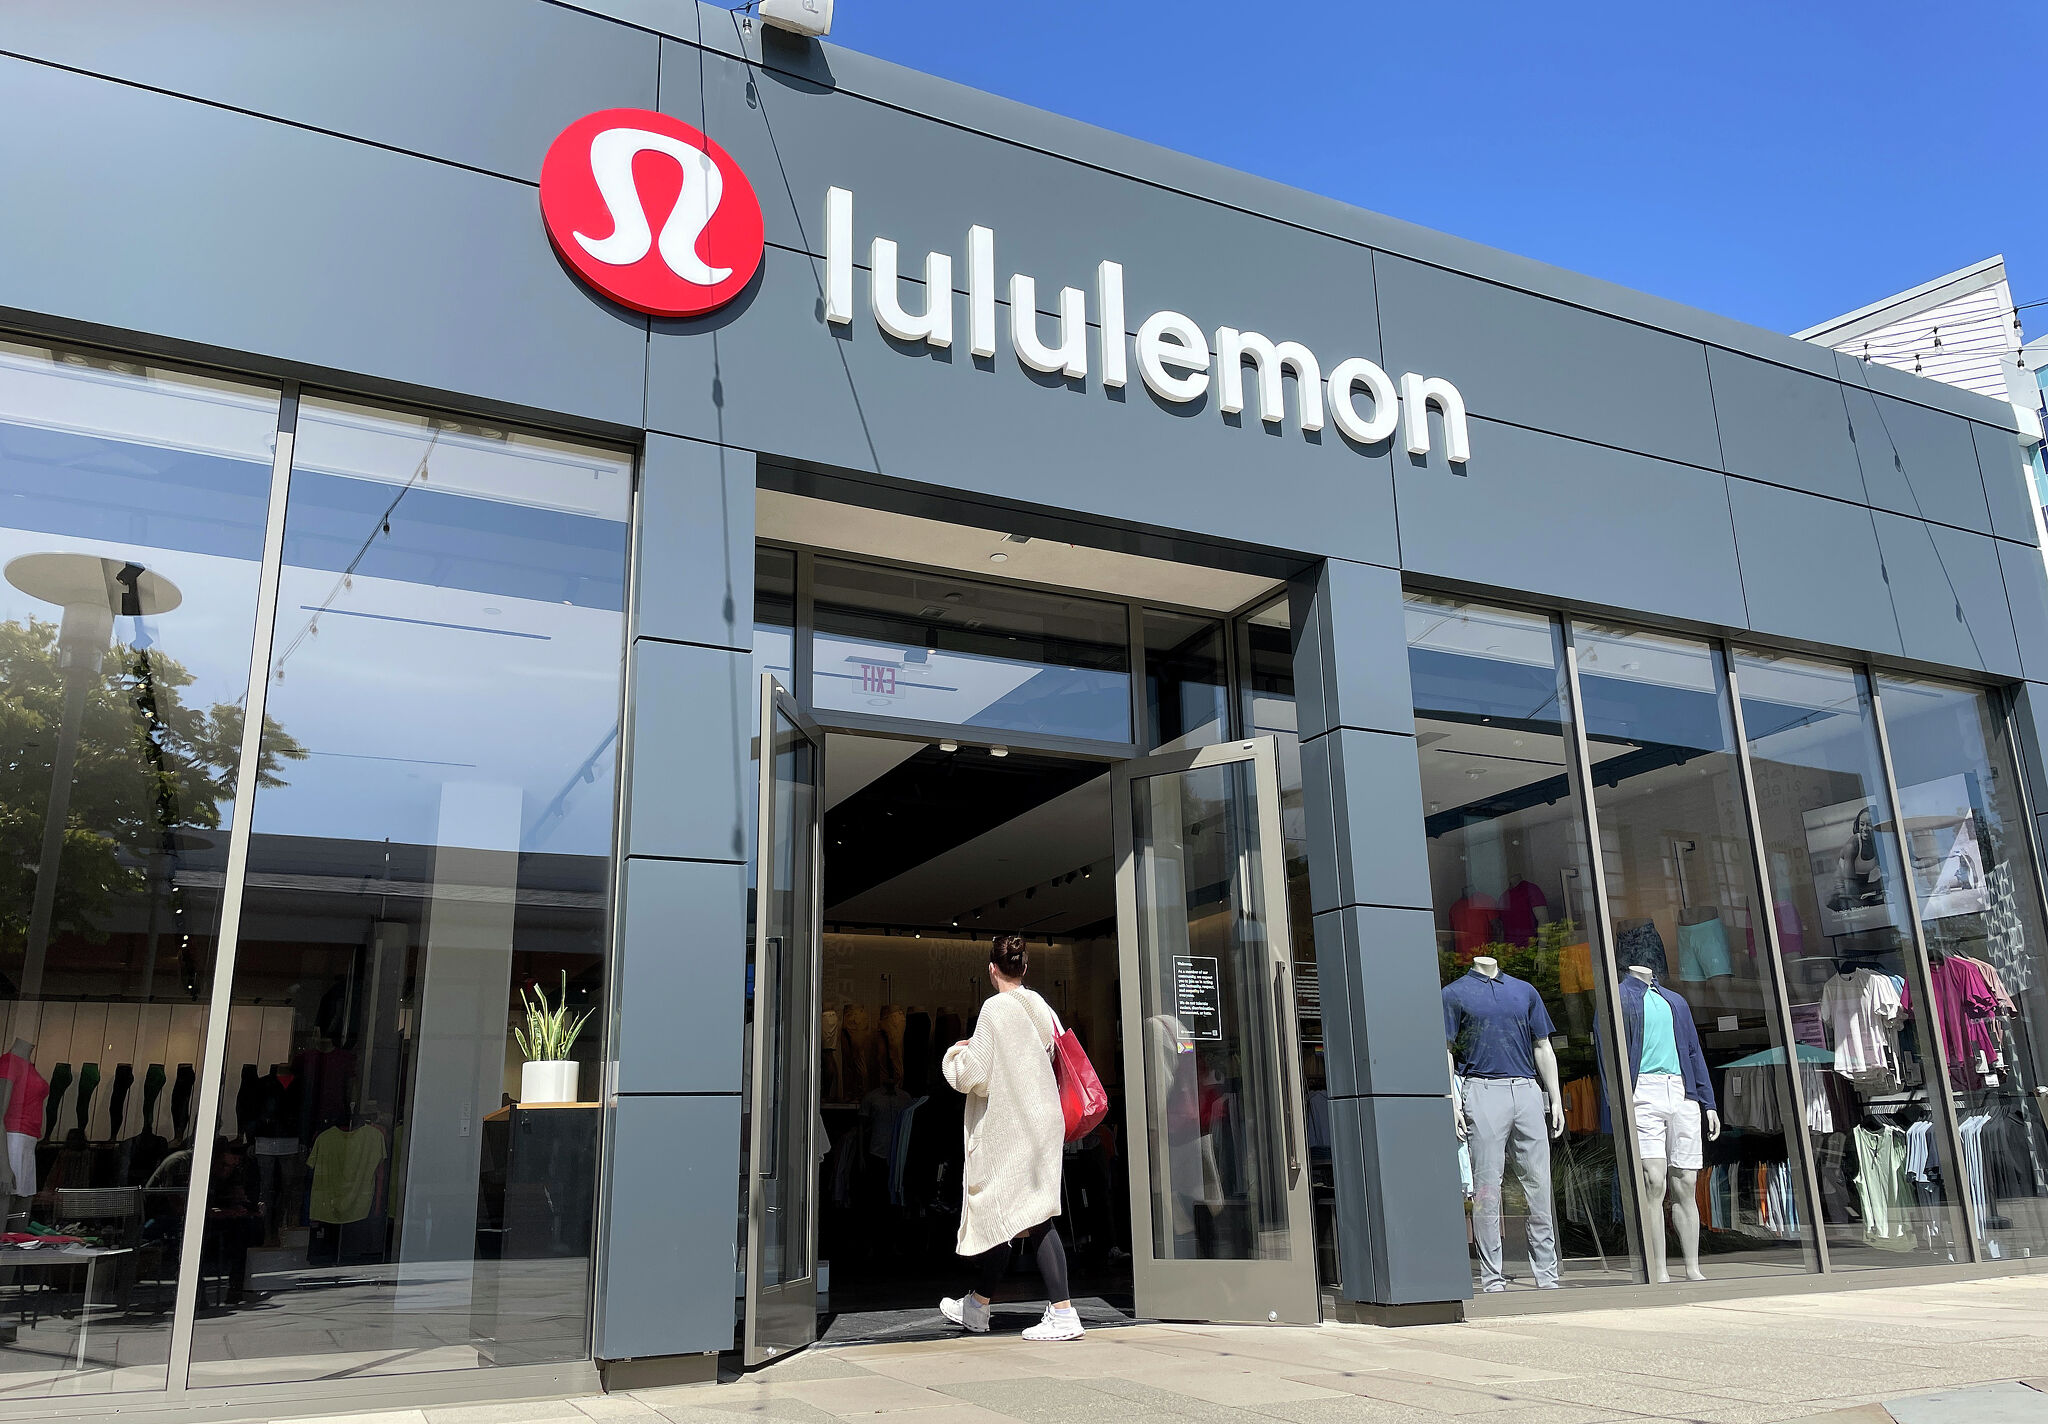 Birch Run Outlets to welcome new additions including Lululemon in Aug.